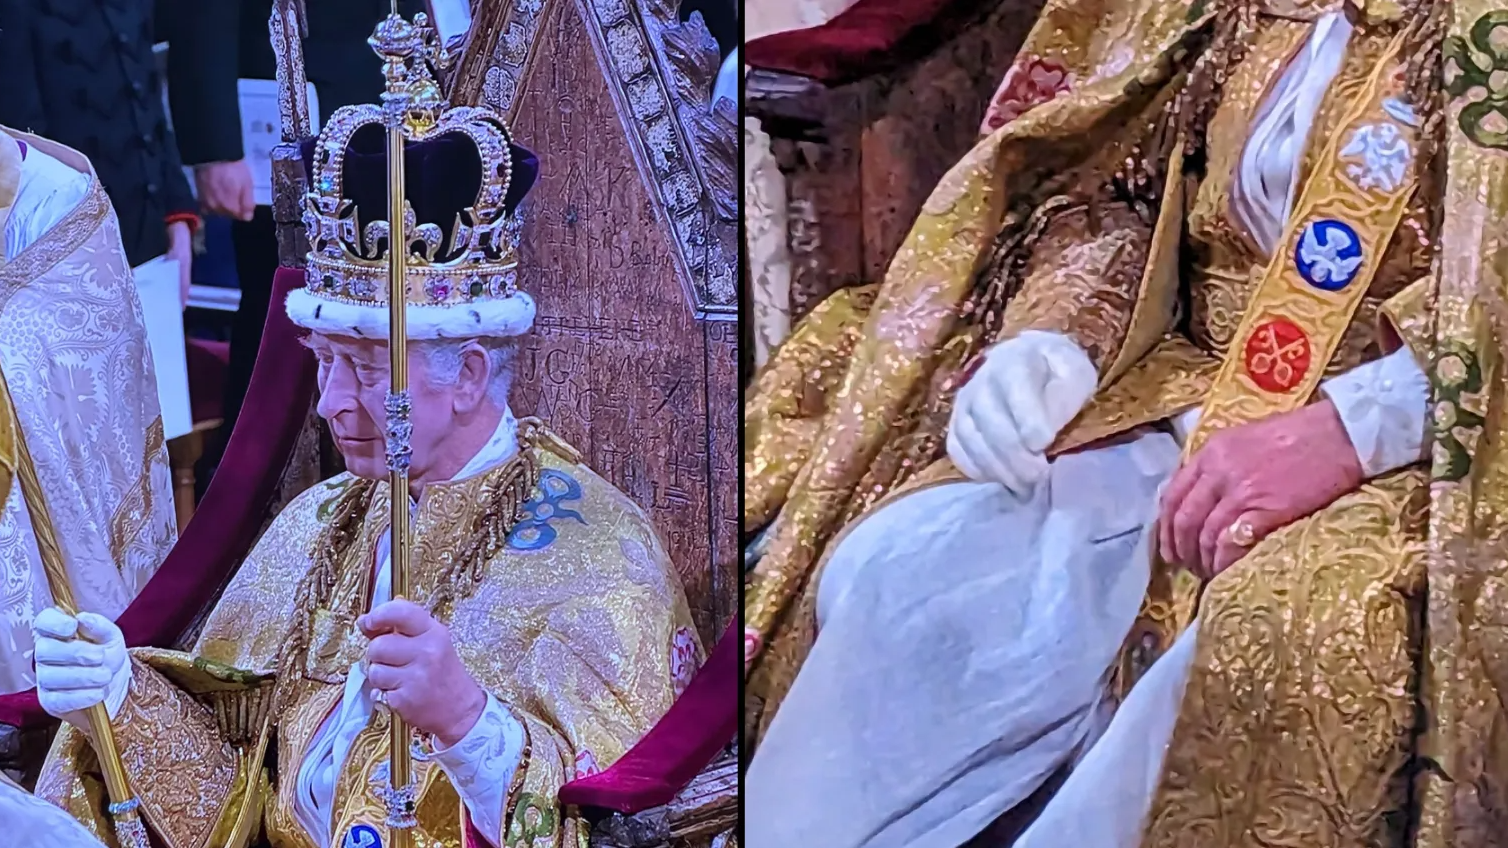 The Reason Why King Charles III Wore Just One White Glove During Coronation